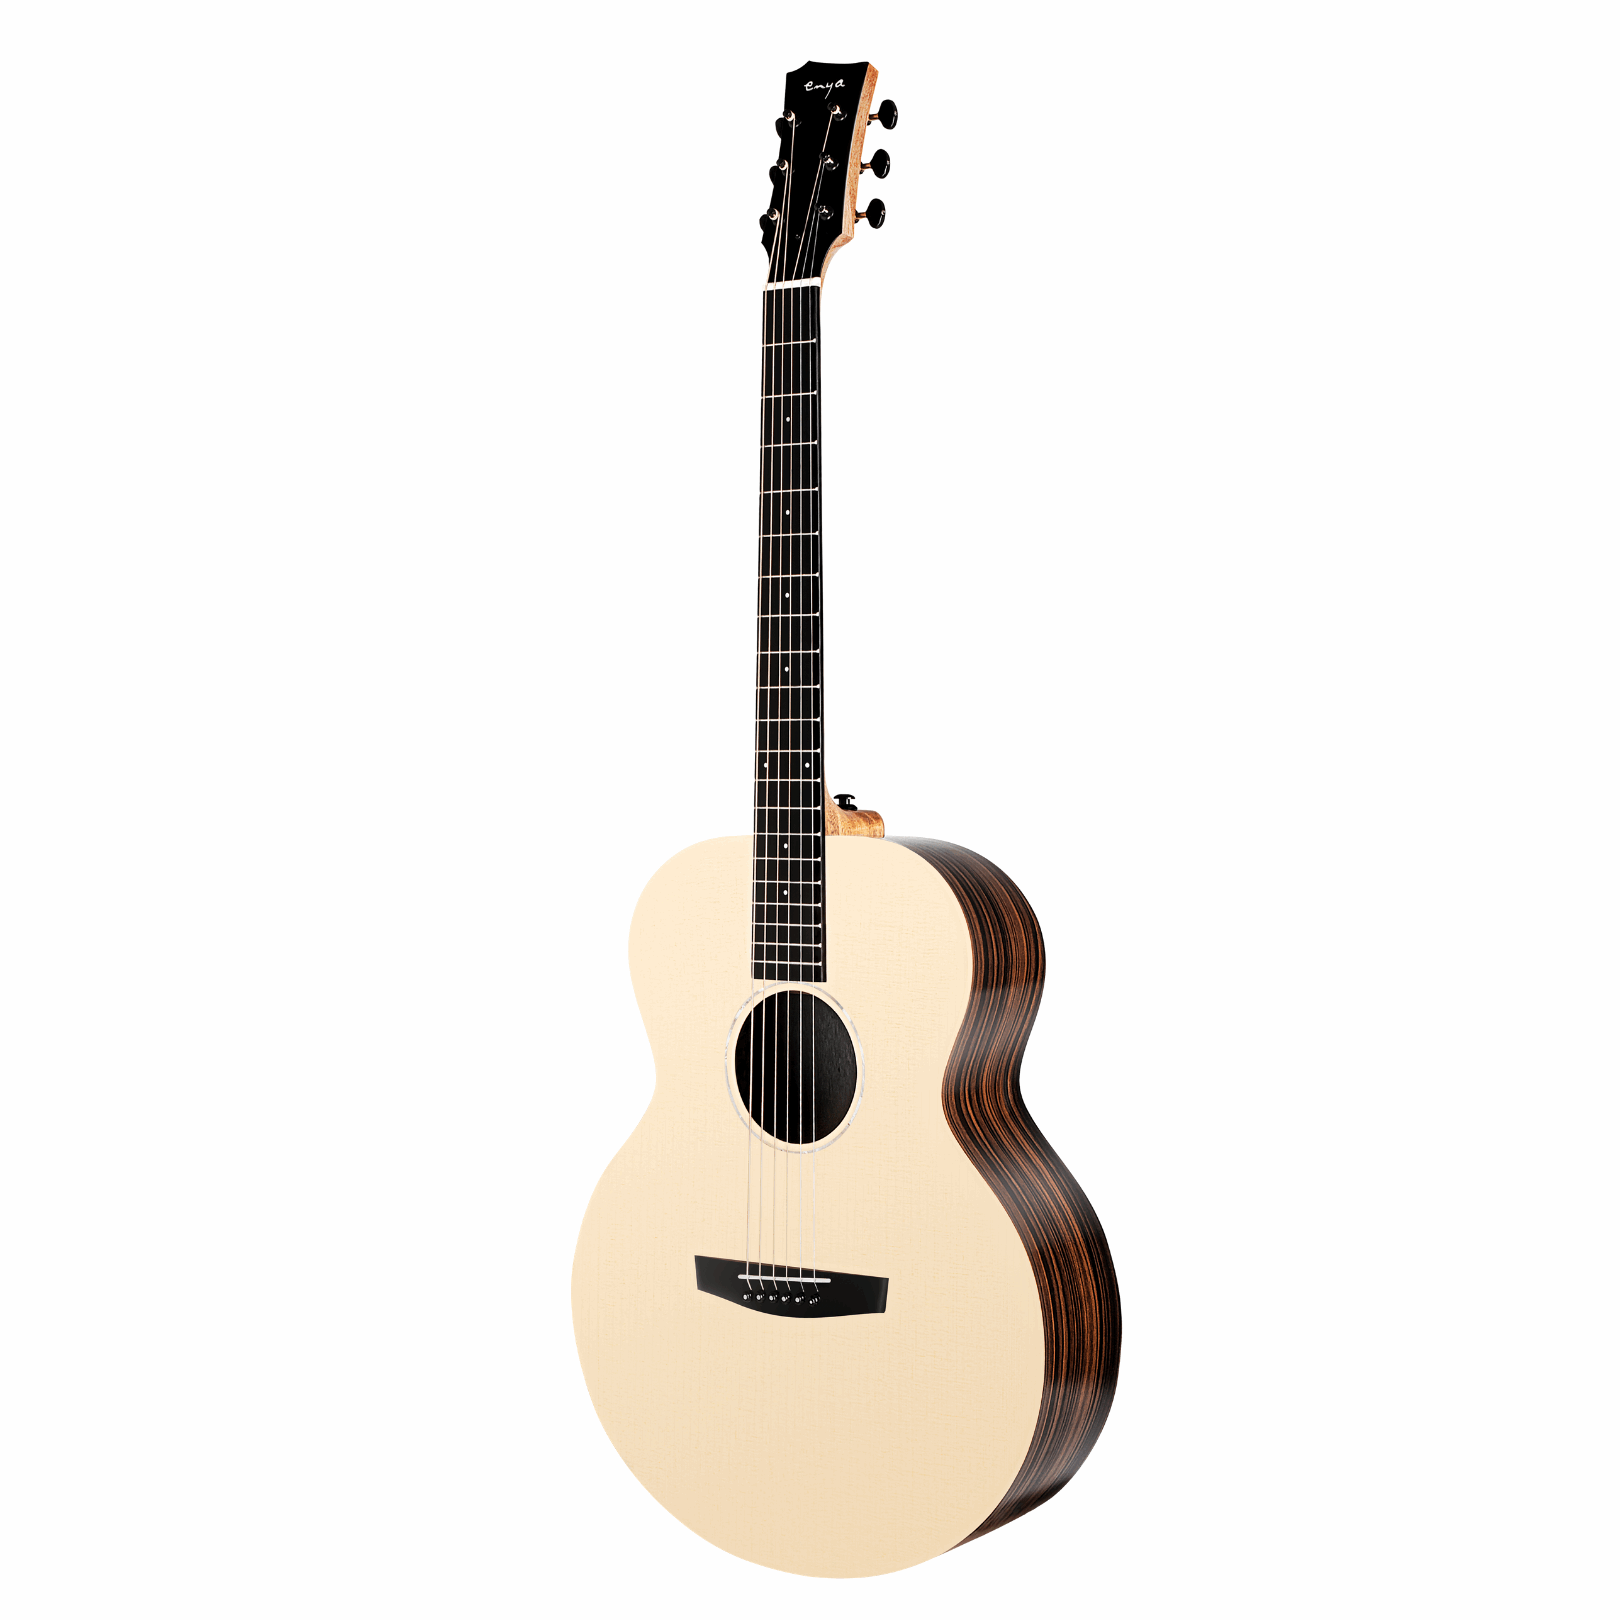 Enya EA-X2e 41" Acoustic Guitar Solid Englemann Spruce Top & Transacoustic Pickup With Bag And Accessories | ENYA , Zoso Music